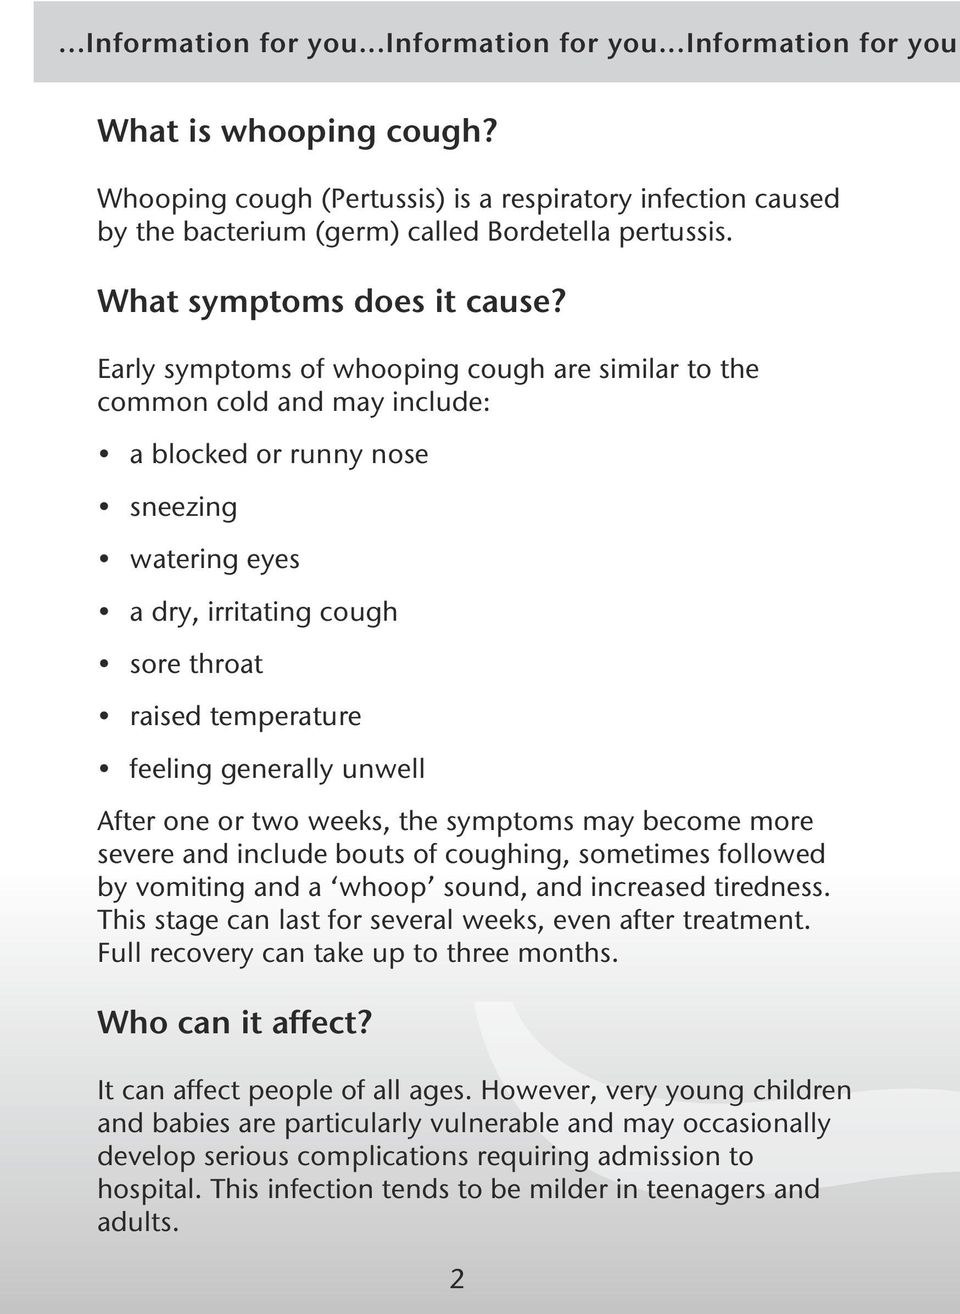 Early symptoms of whooping cough are similar to the common cold and may include: a blocked or runny nose sneezing watering eyes a dry, irritating cough sore throat raised temperature feeling